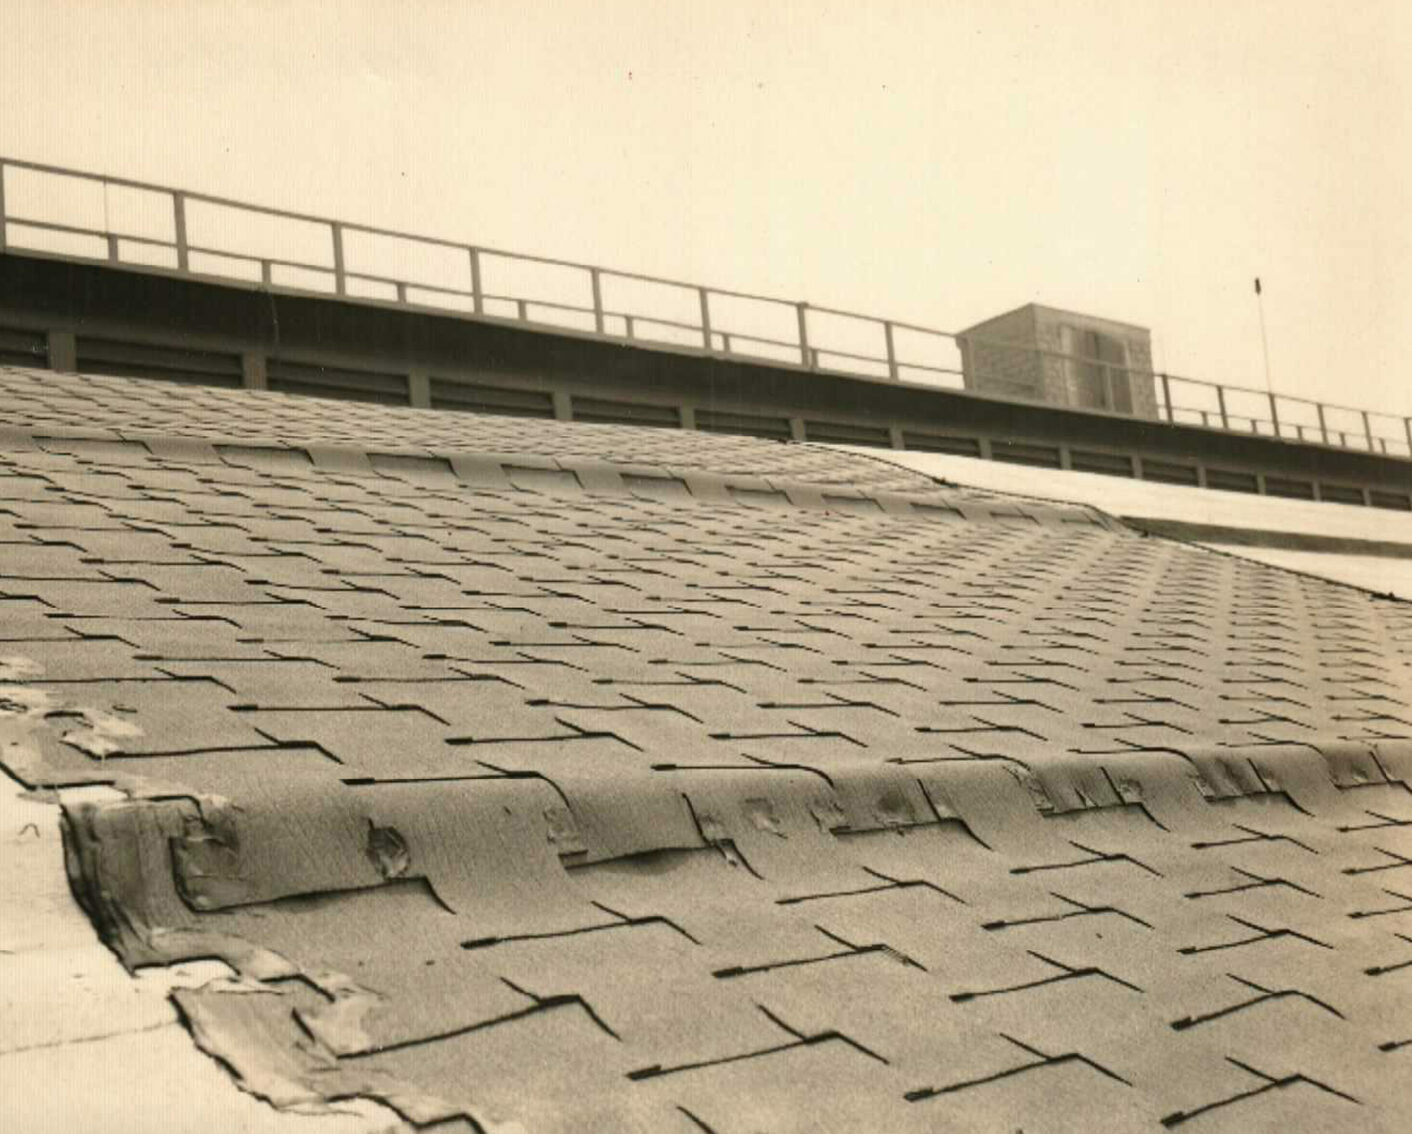 A close-up view of the old interlocking shingles on the roof of Hangar 3.